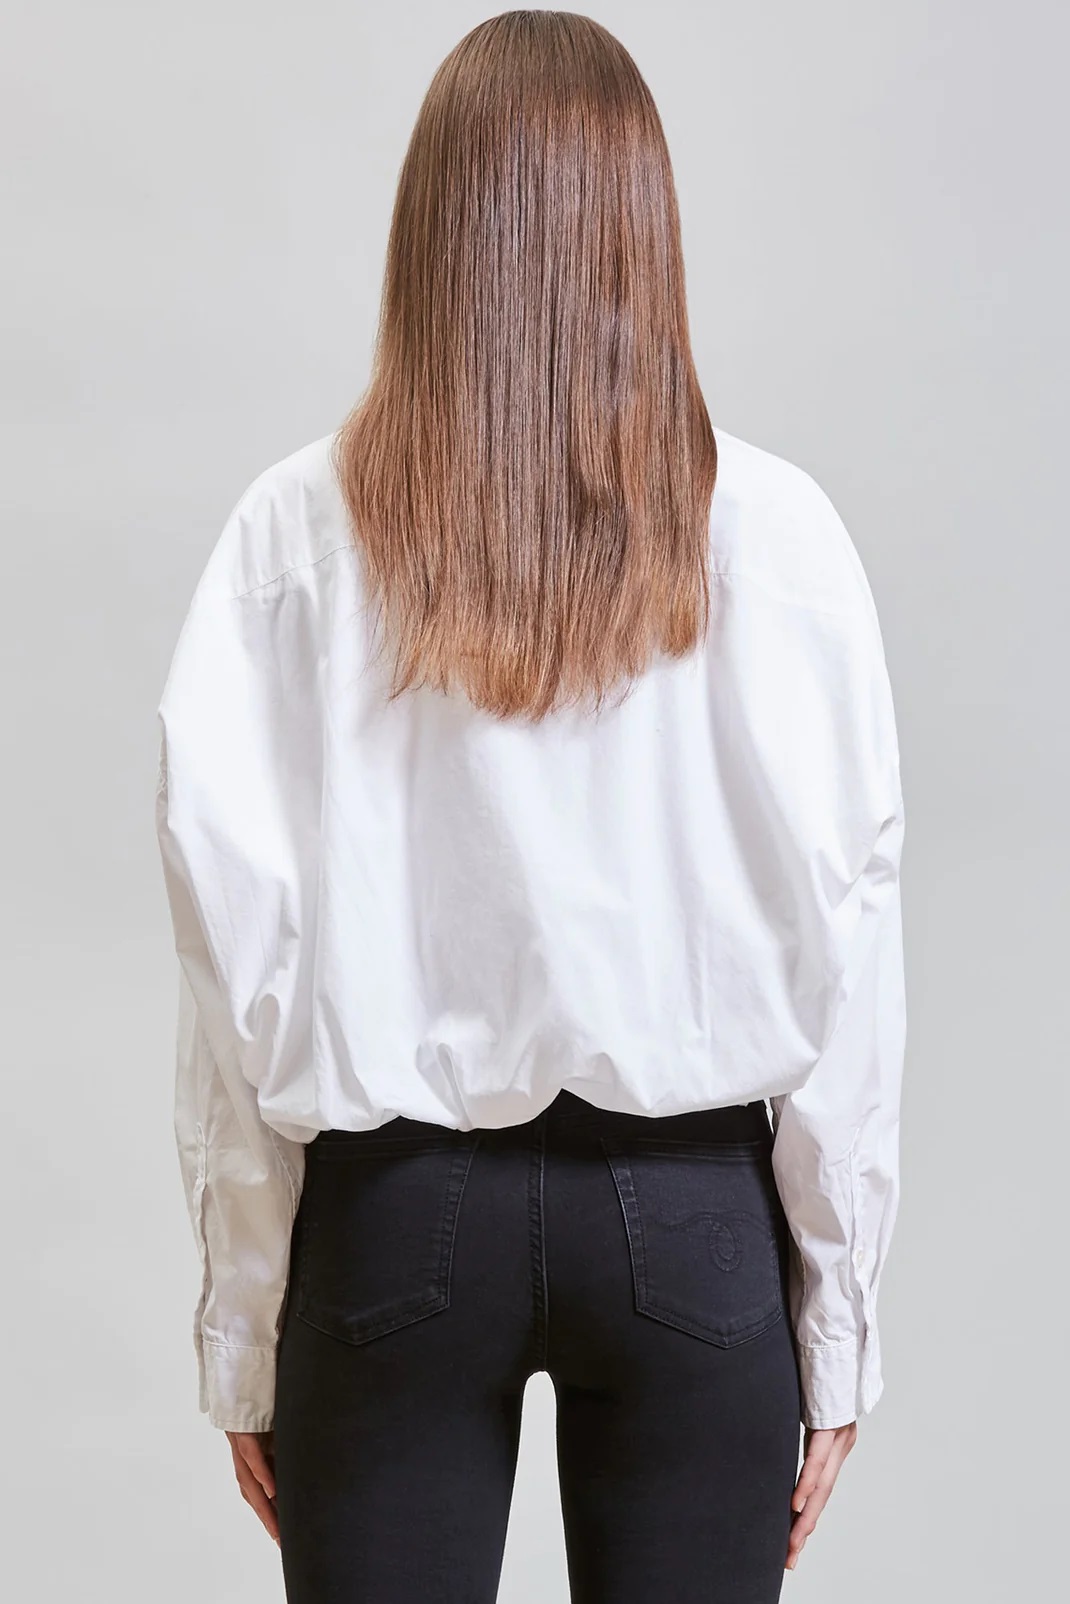 R13 Cropped Gathered Hem Shirt in White S